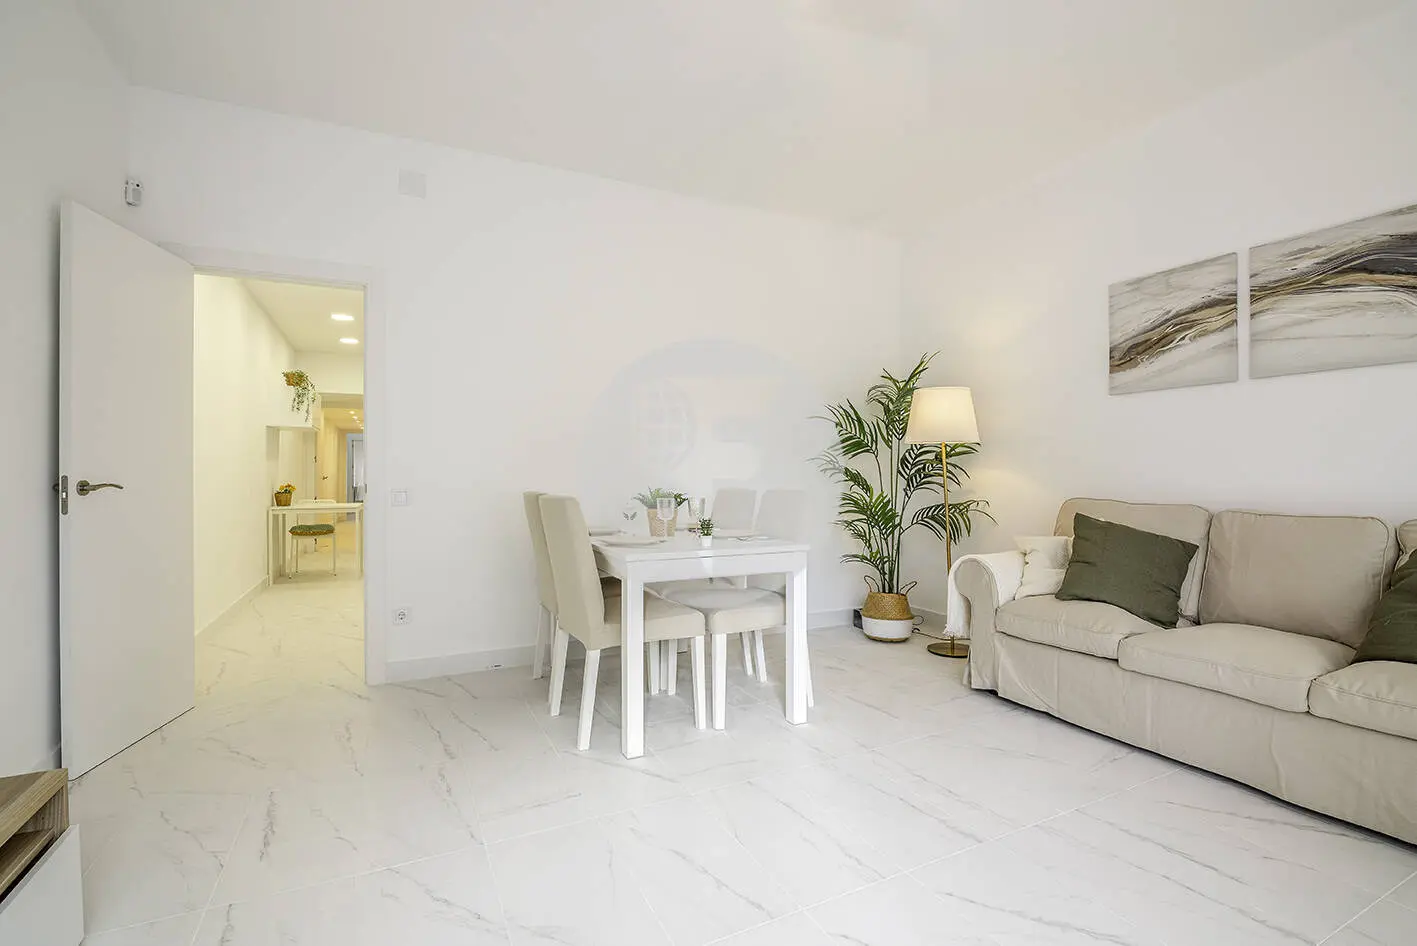 Brand new completely renovated apartment on Aragó street in the heart of El Clot in Barcelona. 3